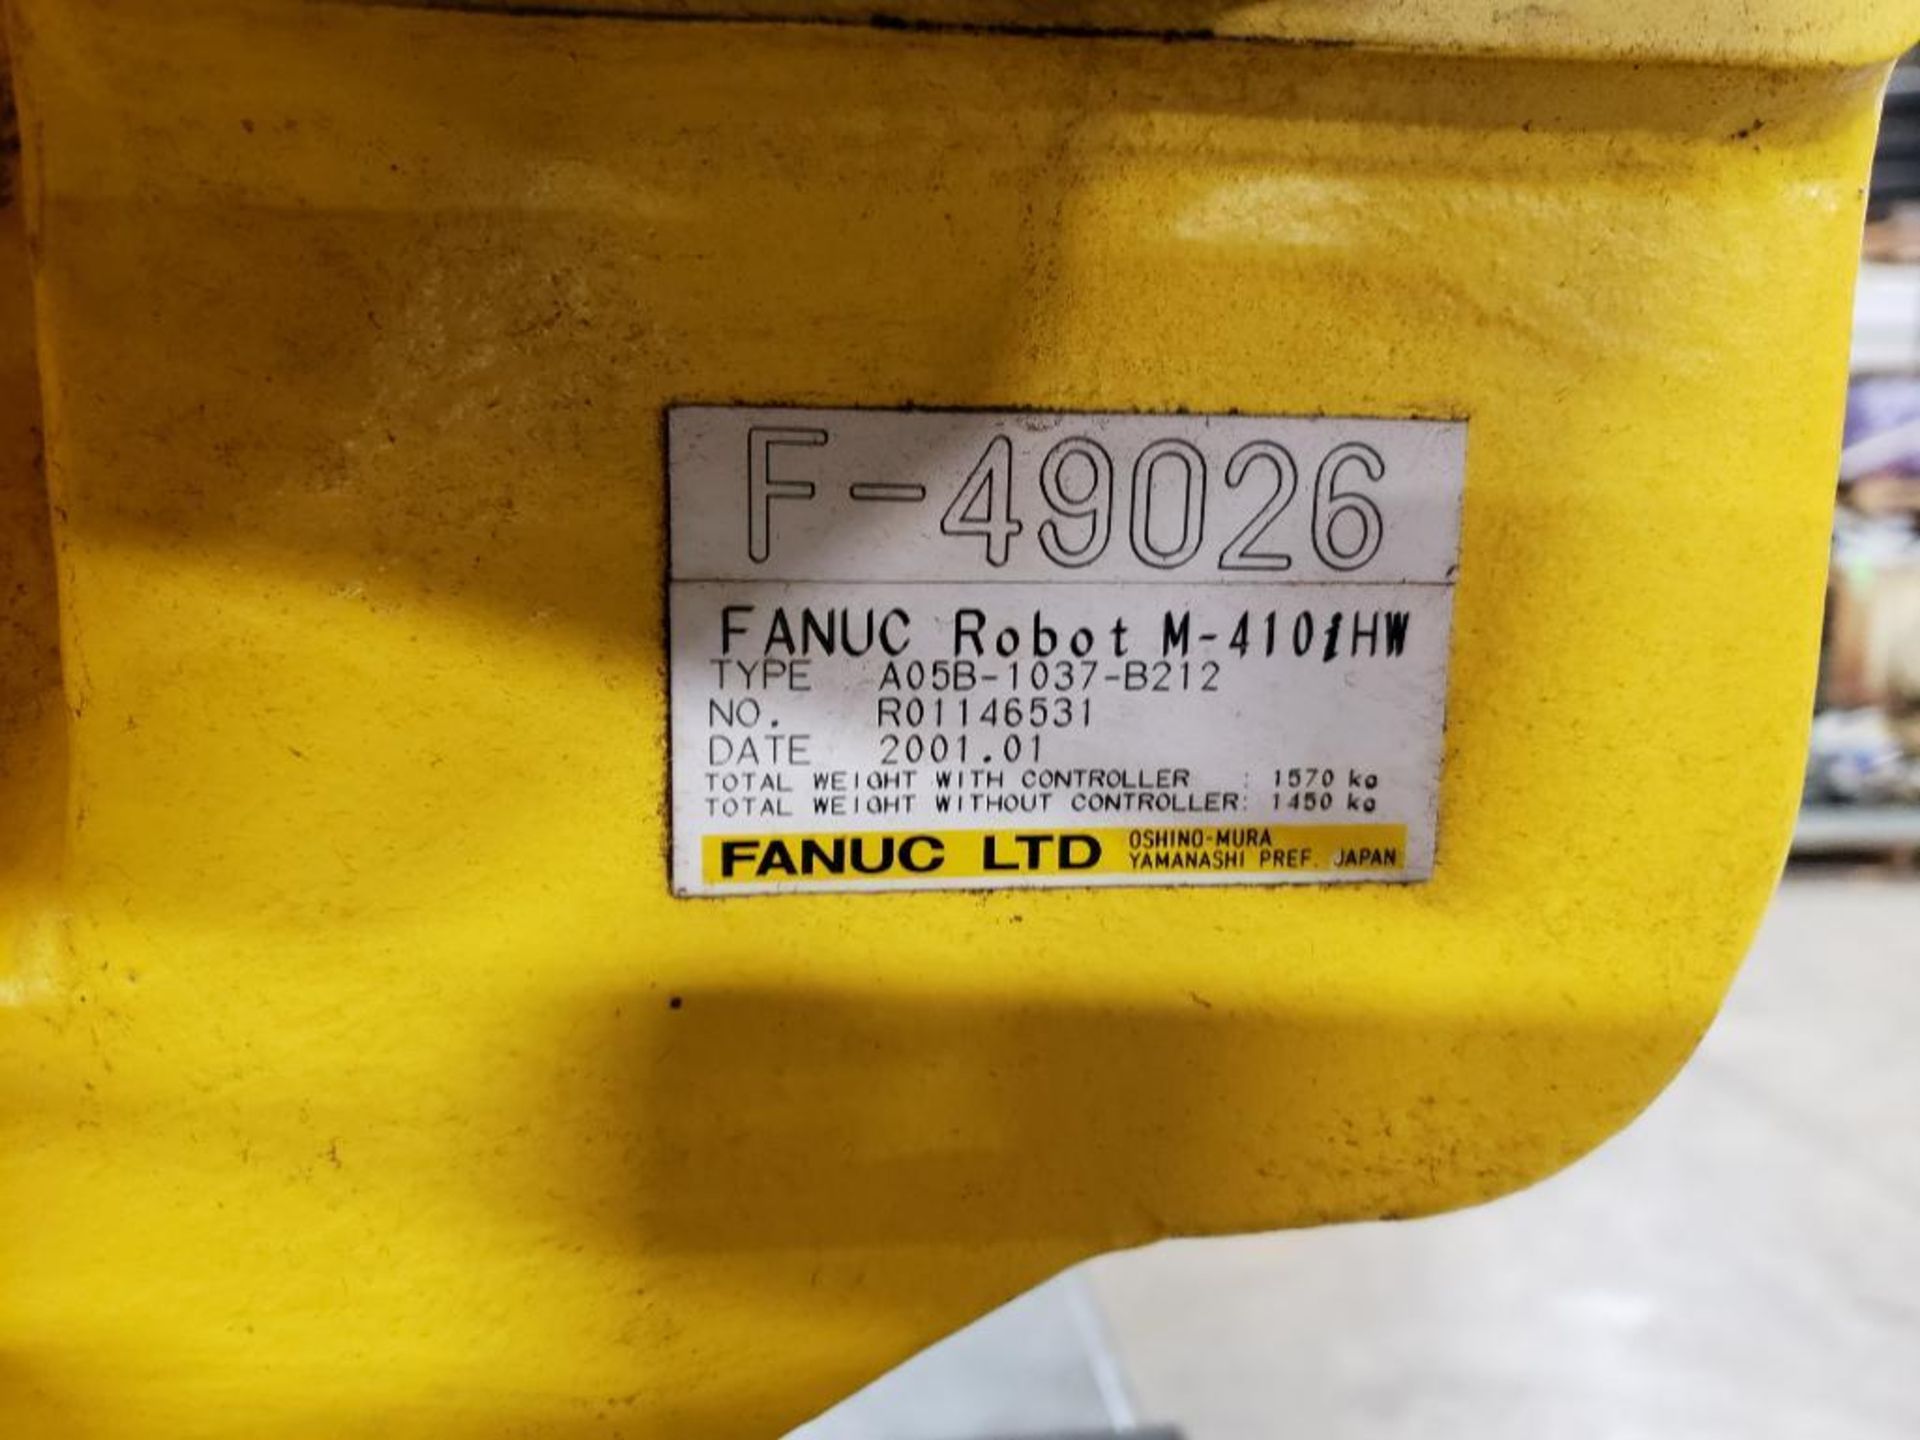 Fanuc M-410i HW robot arm. Does not include controller or cables. (cables have been cut) - Image 4 of 27